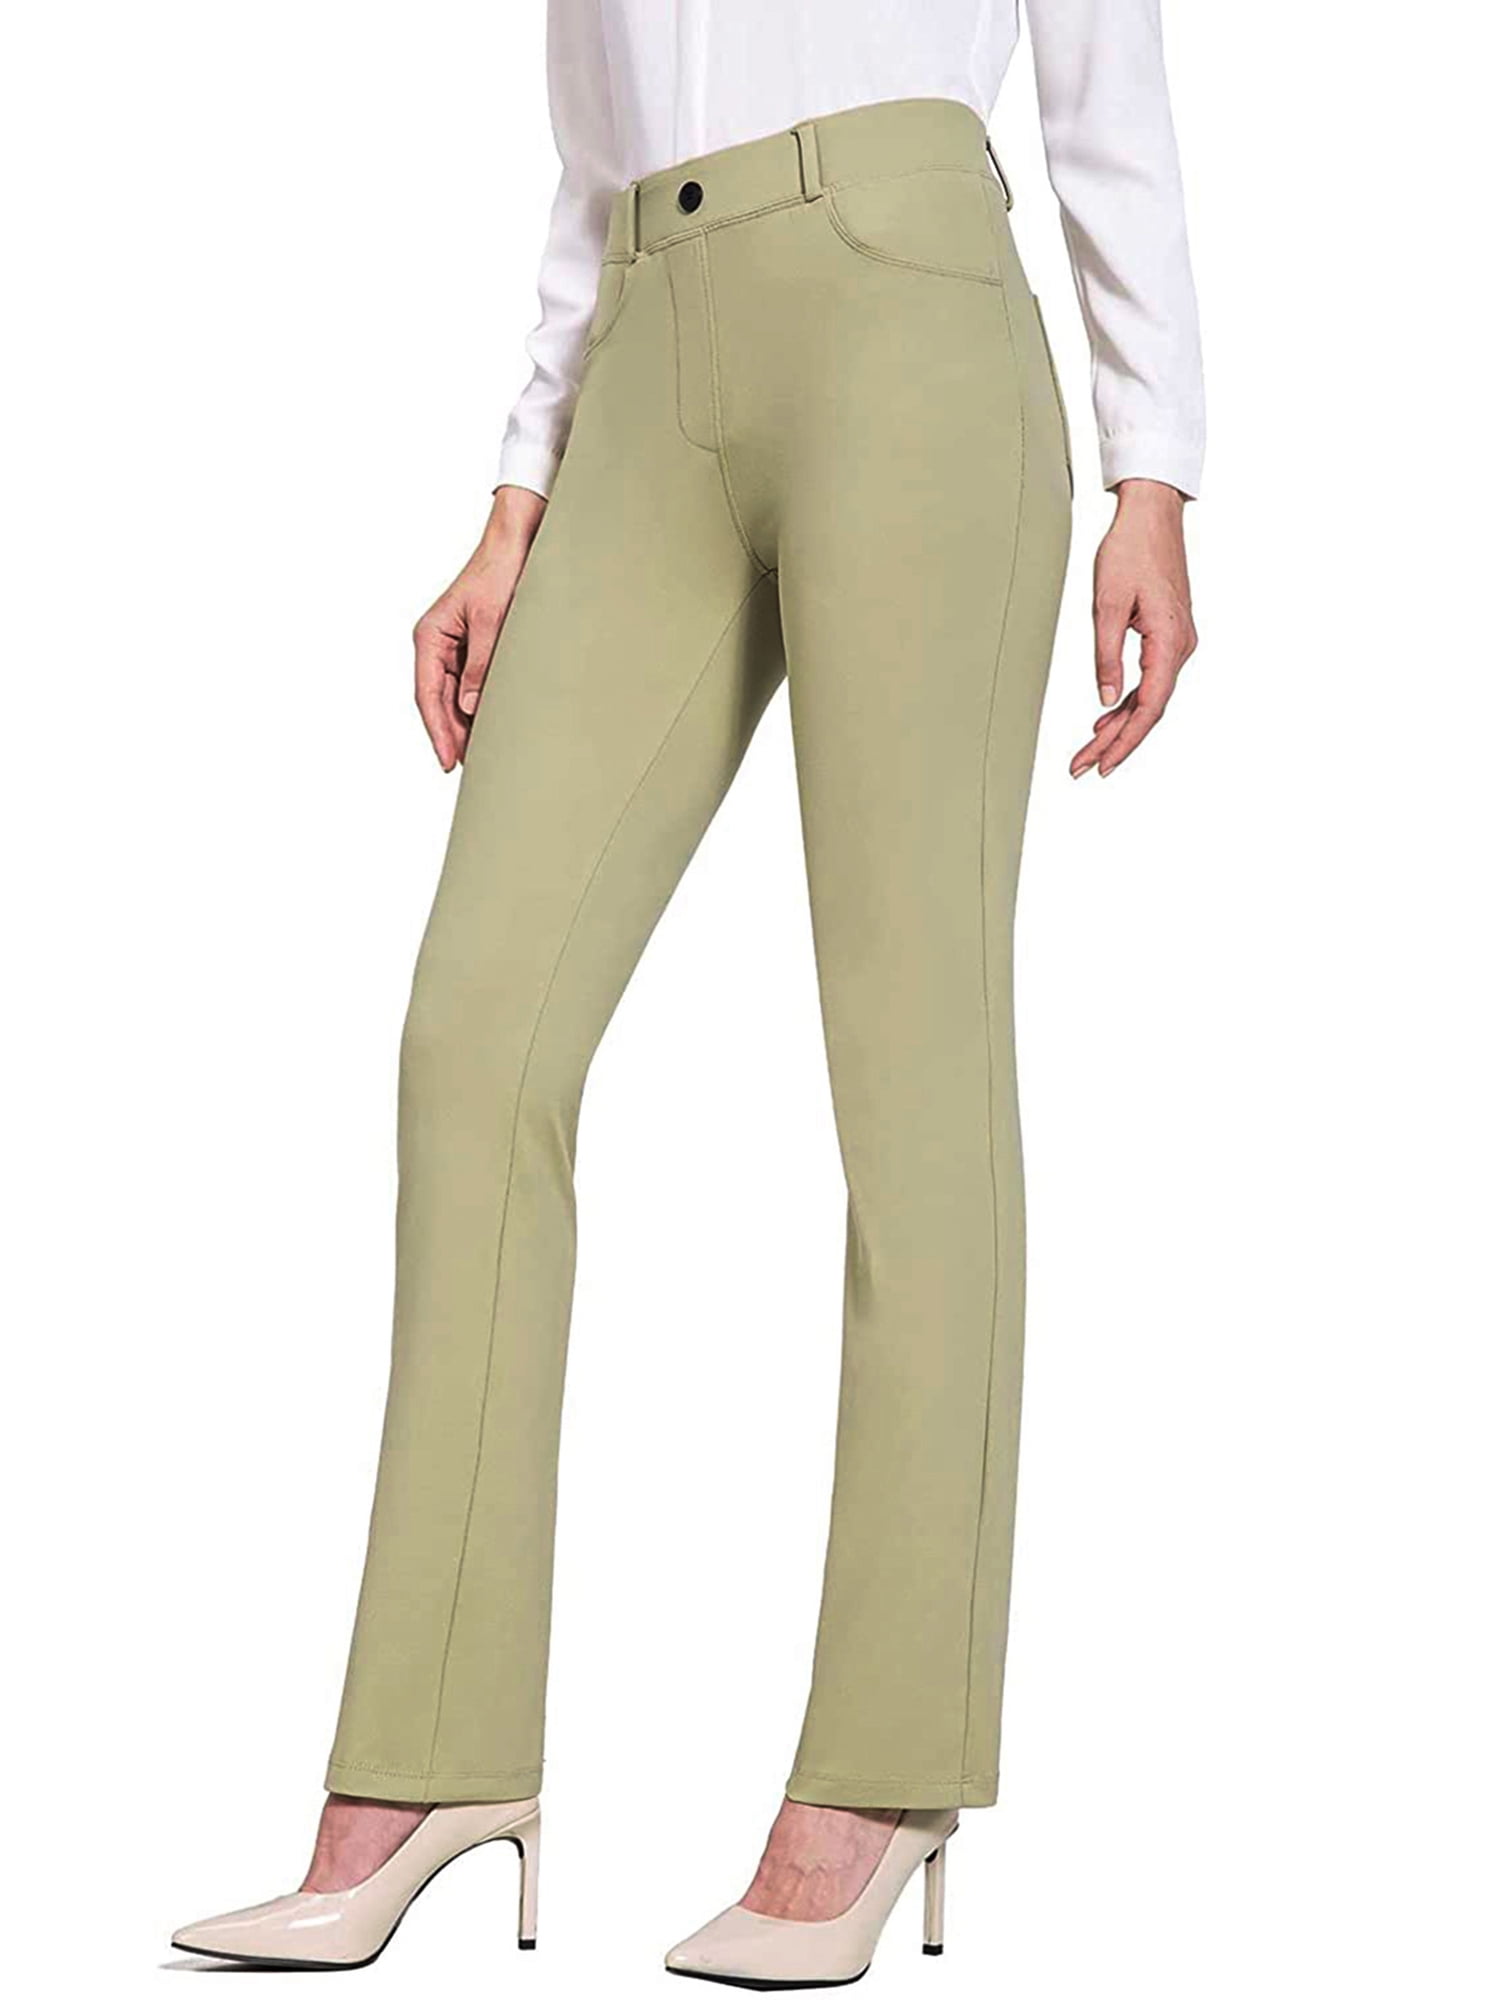 Slacks and Chinos Straight-leg trousers Twinset Twin-set Color Other Materials Pants Womens Clothing Trousers 